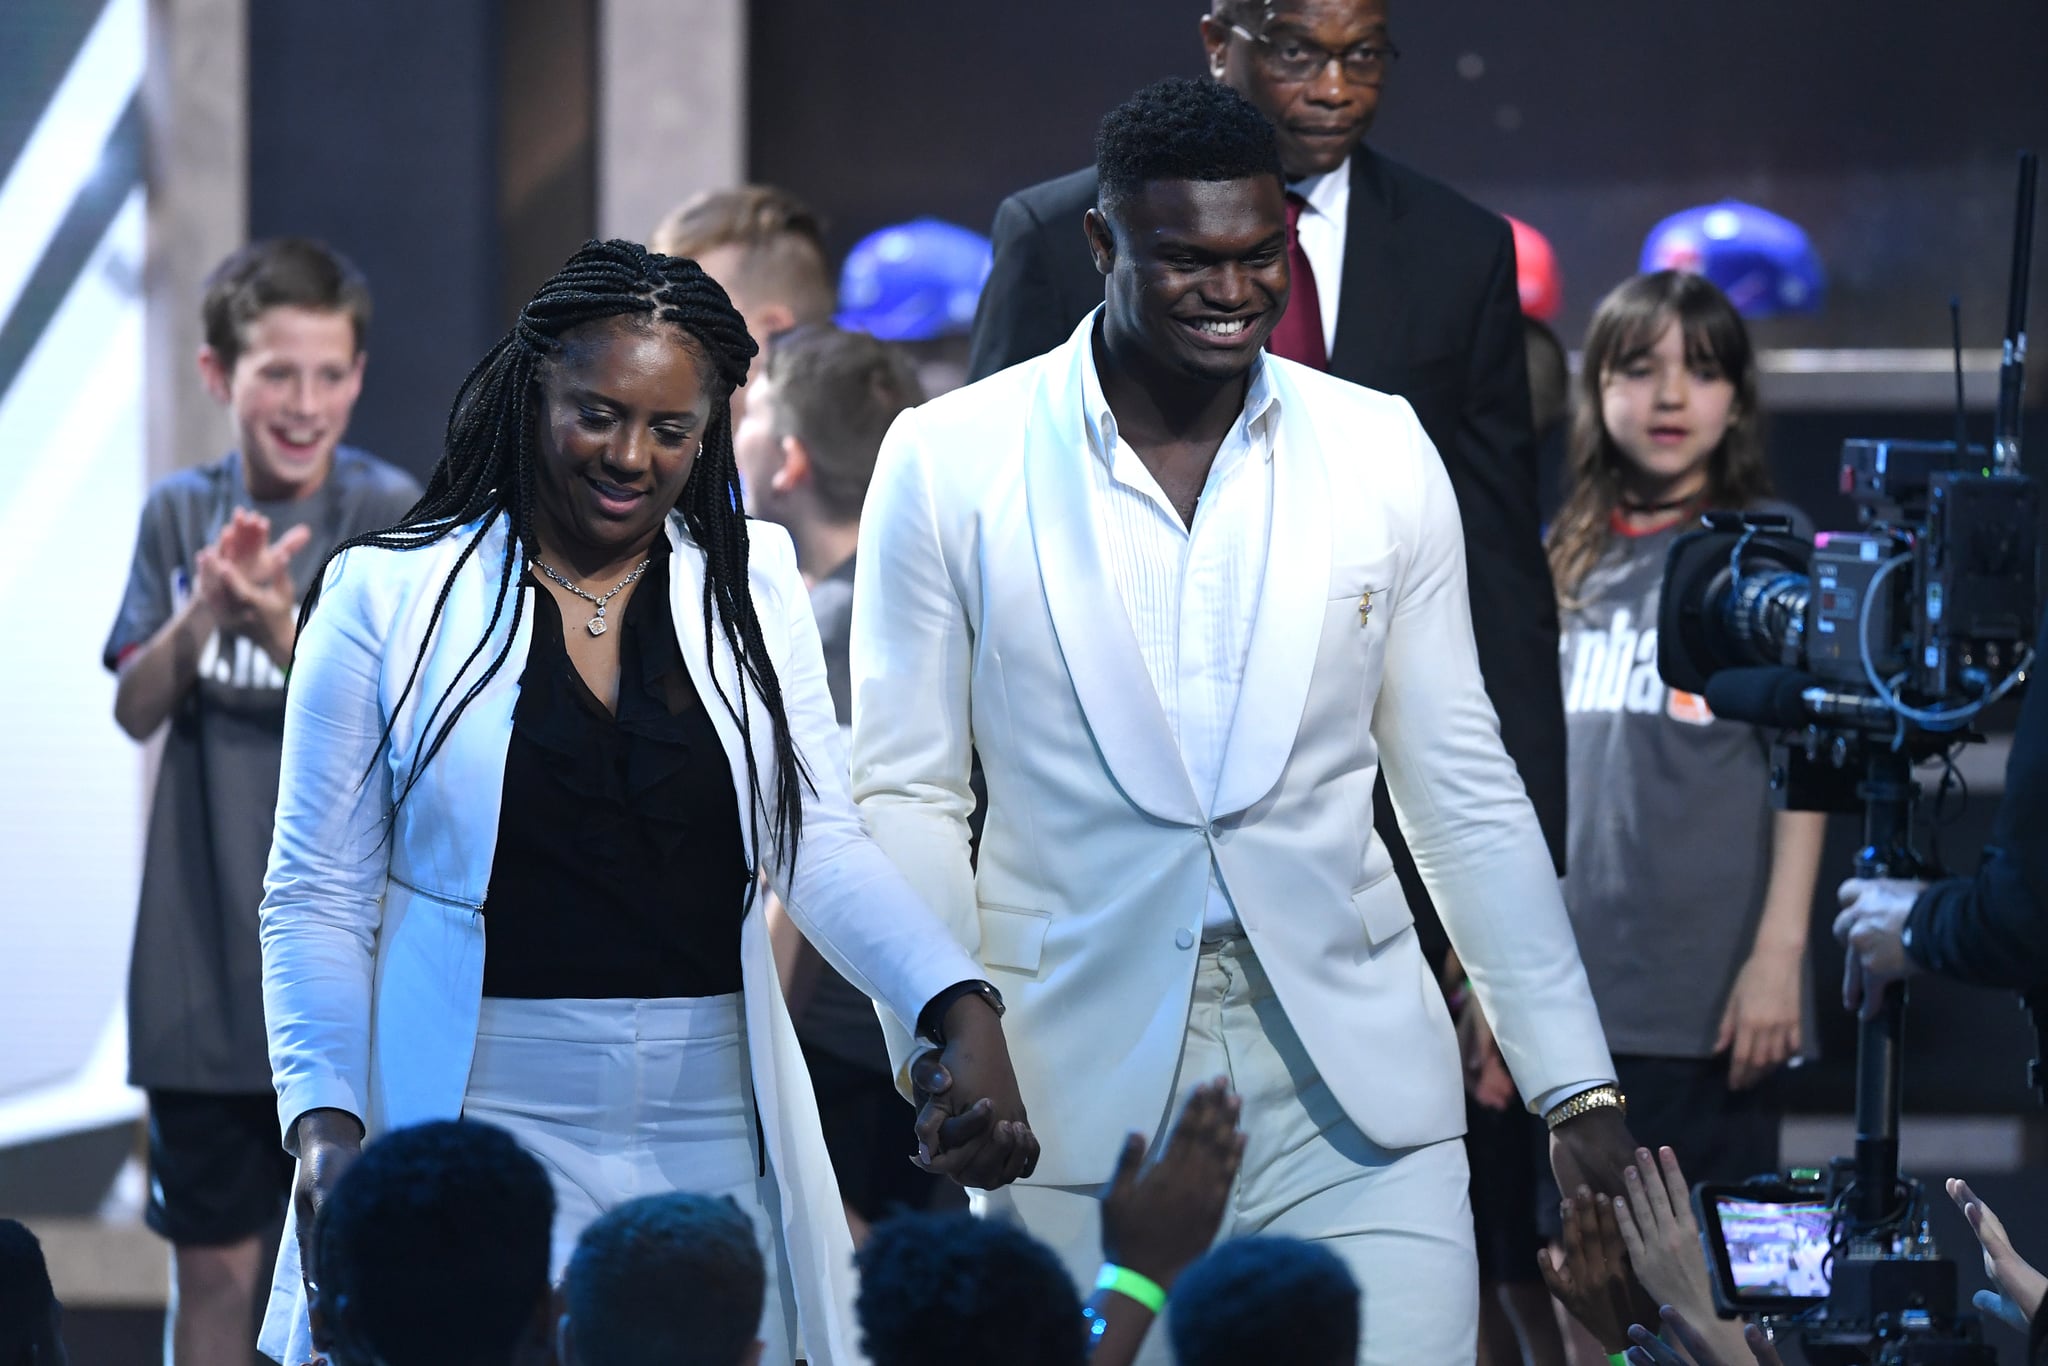 NEW YORK, NEW YORK - JUNE 20: NBA Prospect Zion Williamson is introduced before the start of the 2019 NBA Draft at the Barclays Centre on June 20, 2019 in the Brooklyn borough of New York City. NOTE TO USER: User expressly acknowledges and agrees that, by downloading and or using this photograph, User is consenting to the terms and conditions of the Getty Images Licence Agreement. (Photo by Sarah Stier/Getty Images)